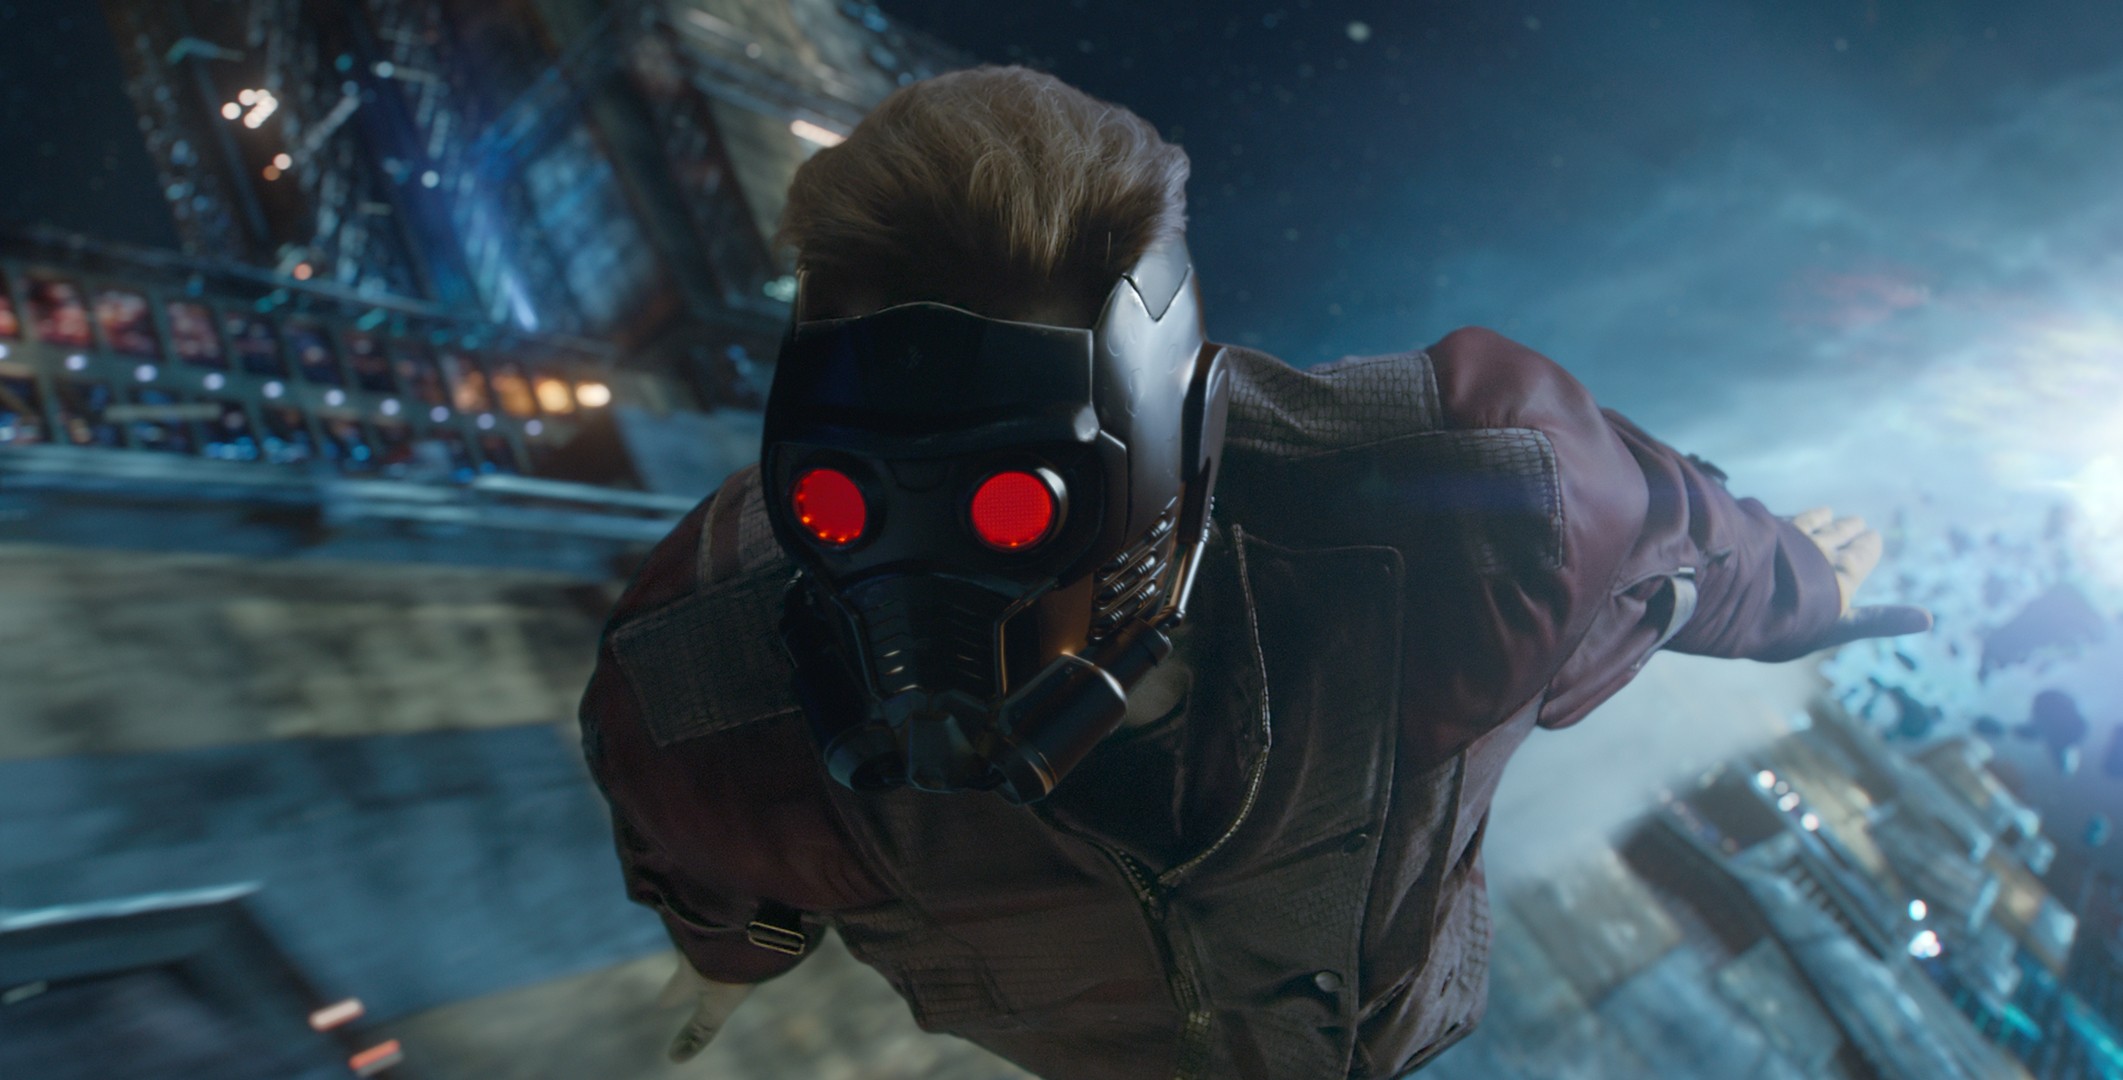 Starlord Star Lord Guardians Of The Galaxy Wallpaper:2123x1080